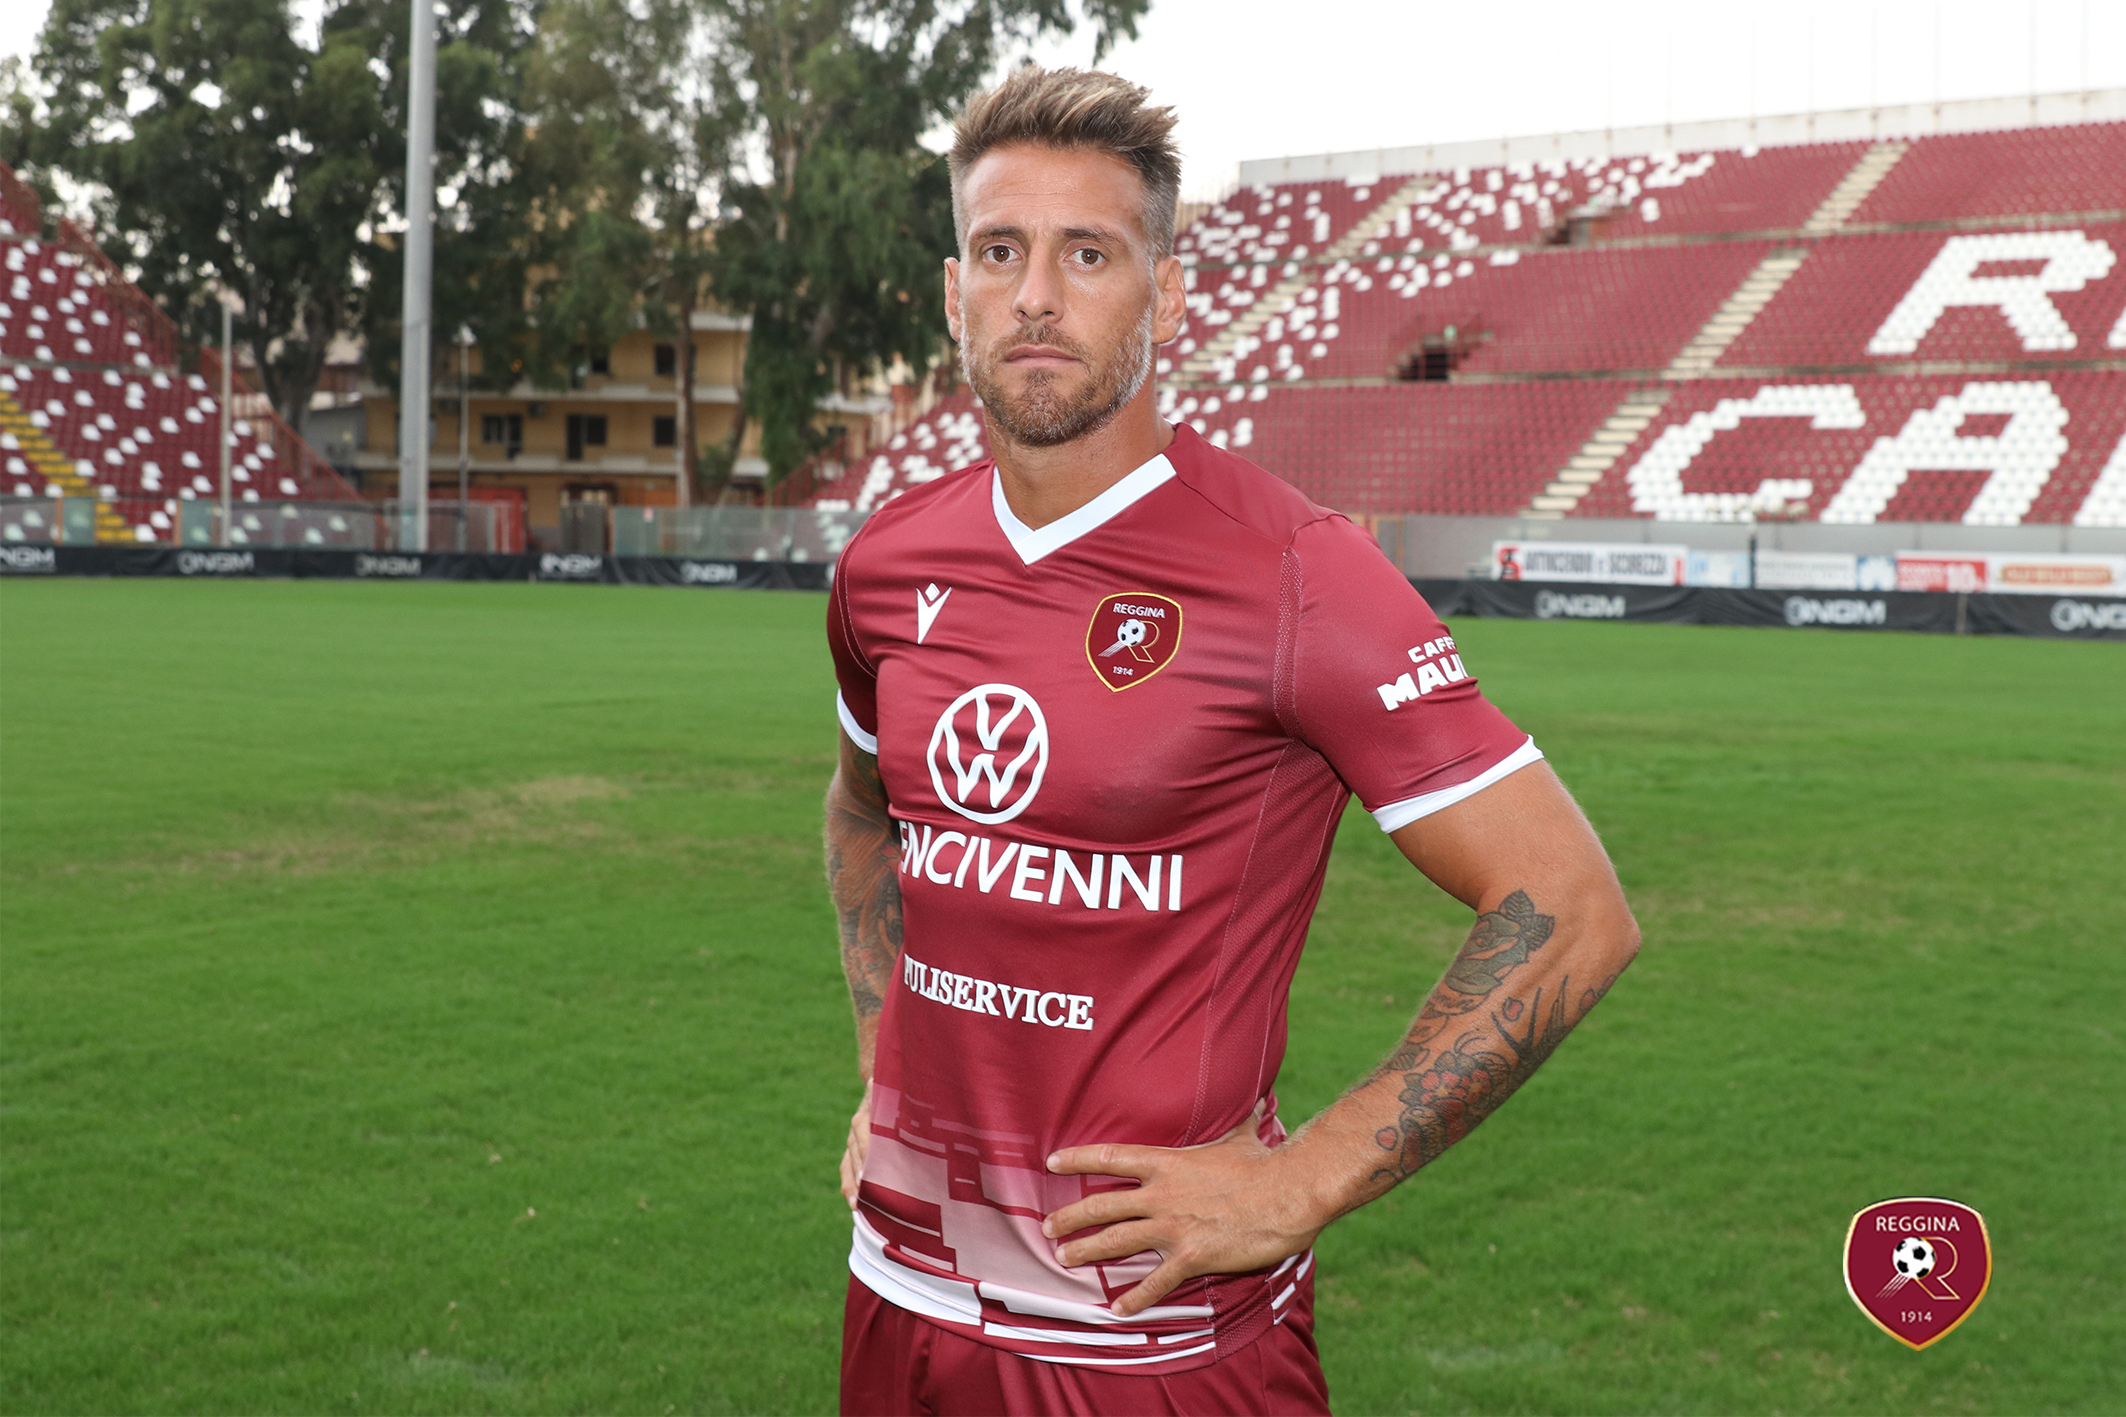 Reggina 1914 on Twitter: "The 🆕 first shirt for the season 20/21 😎 📷  Lillo D'Ascola #ambition https://t.co/GZQVrQ7OGN" / X